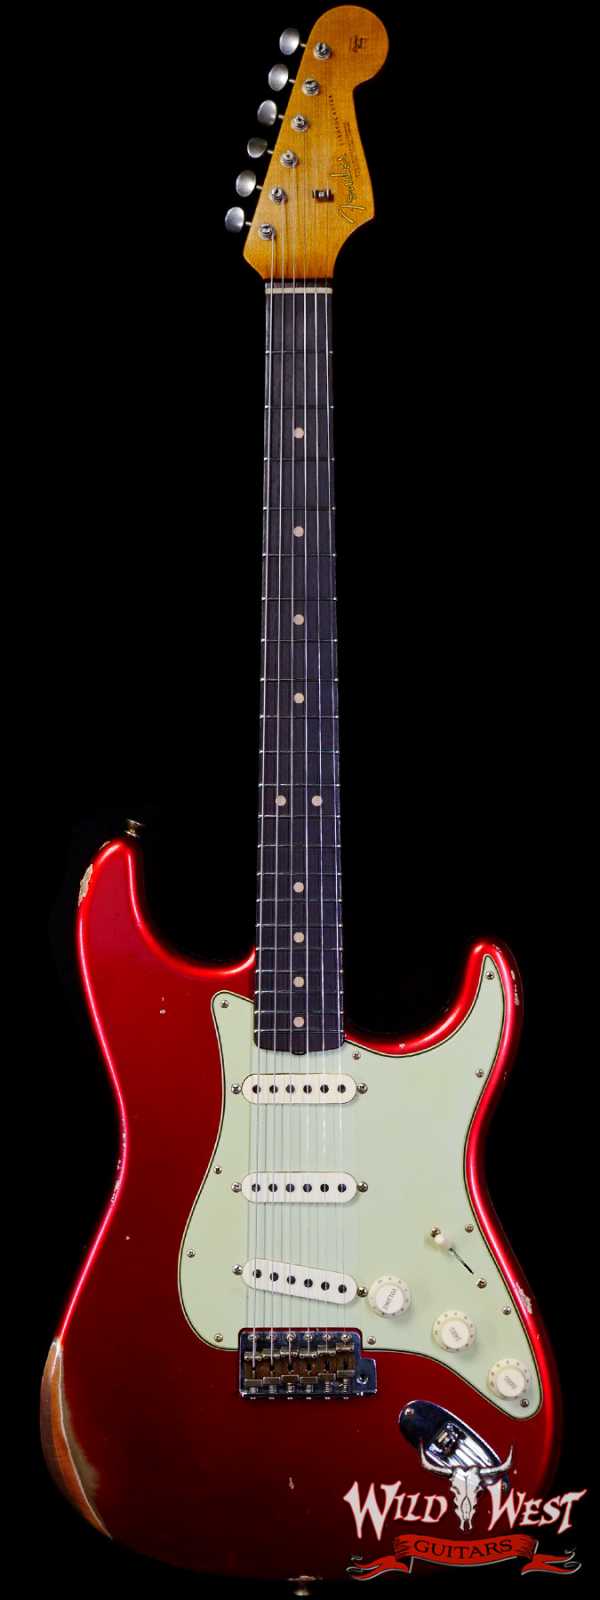 Fender Custom Shop 1963 Stratocaster Hand-Wound Pickups Roasted Maple Neck Relic Aged Candy Apple Red